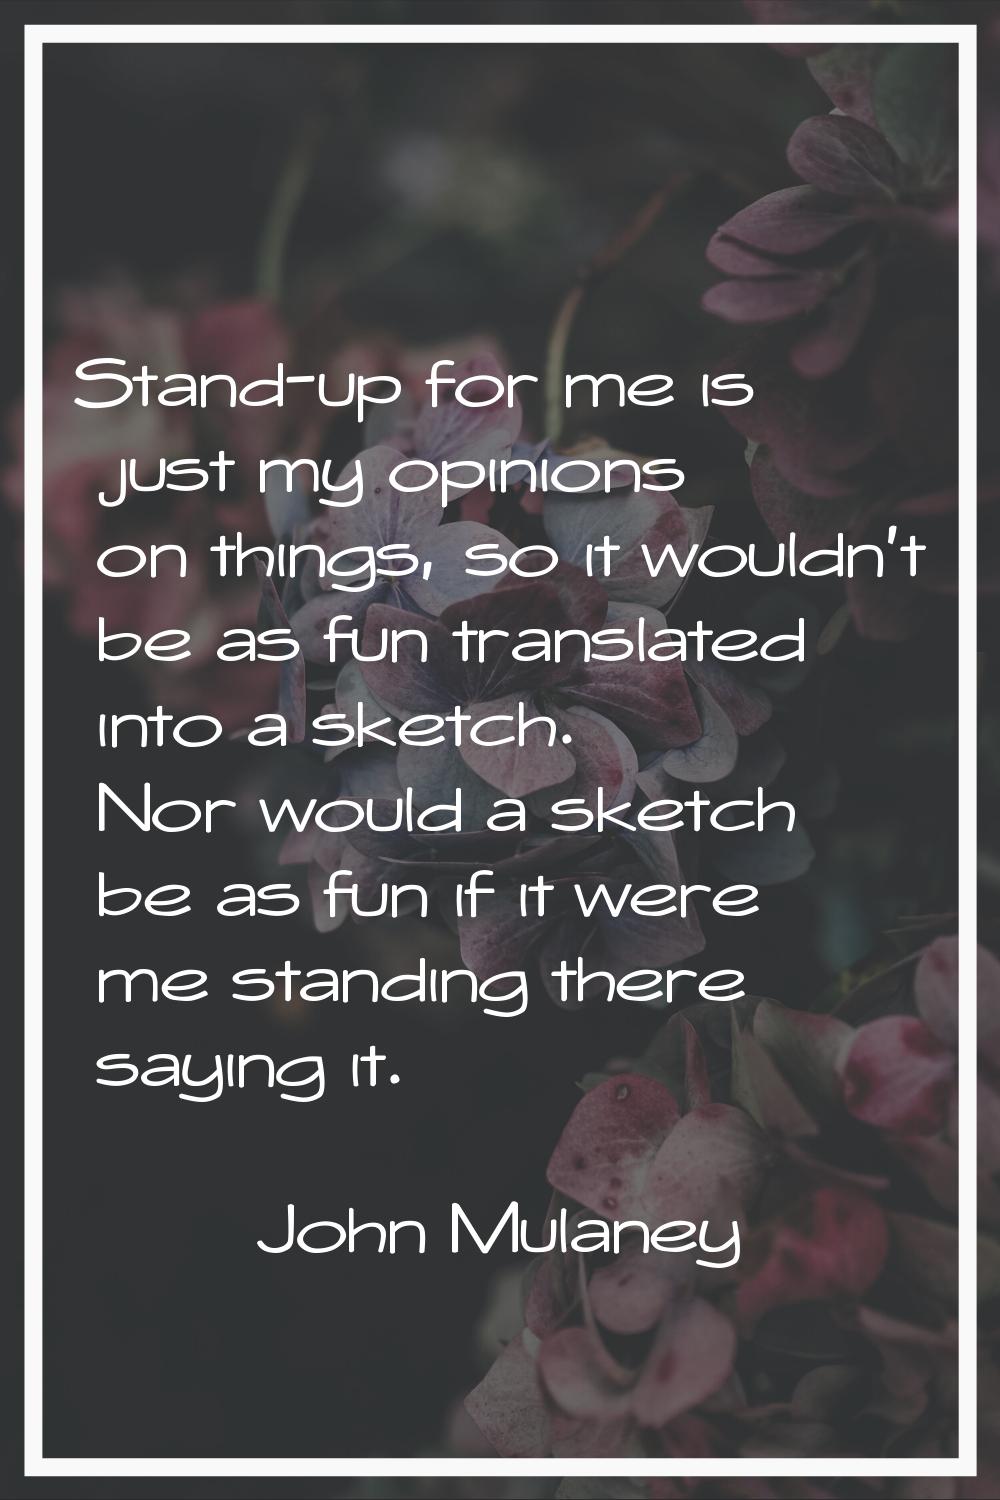 Stand-up for me is just my opinions on things, so it wouldn't be as fun translated into a sketch. N